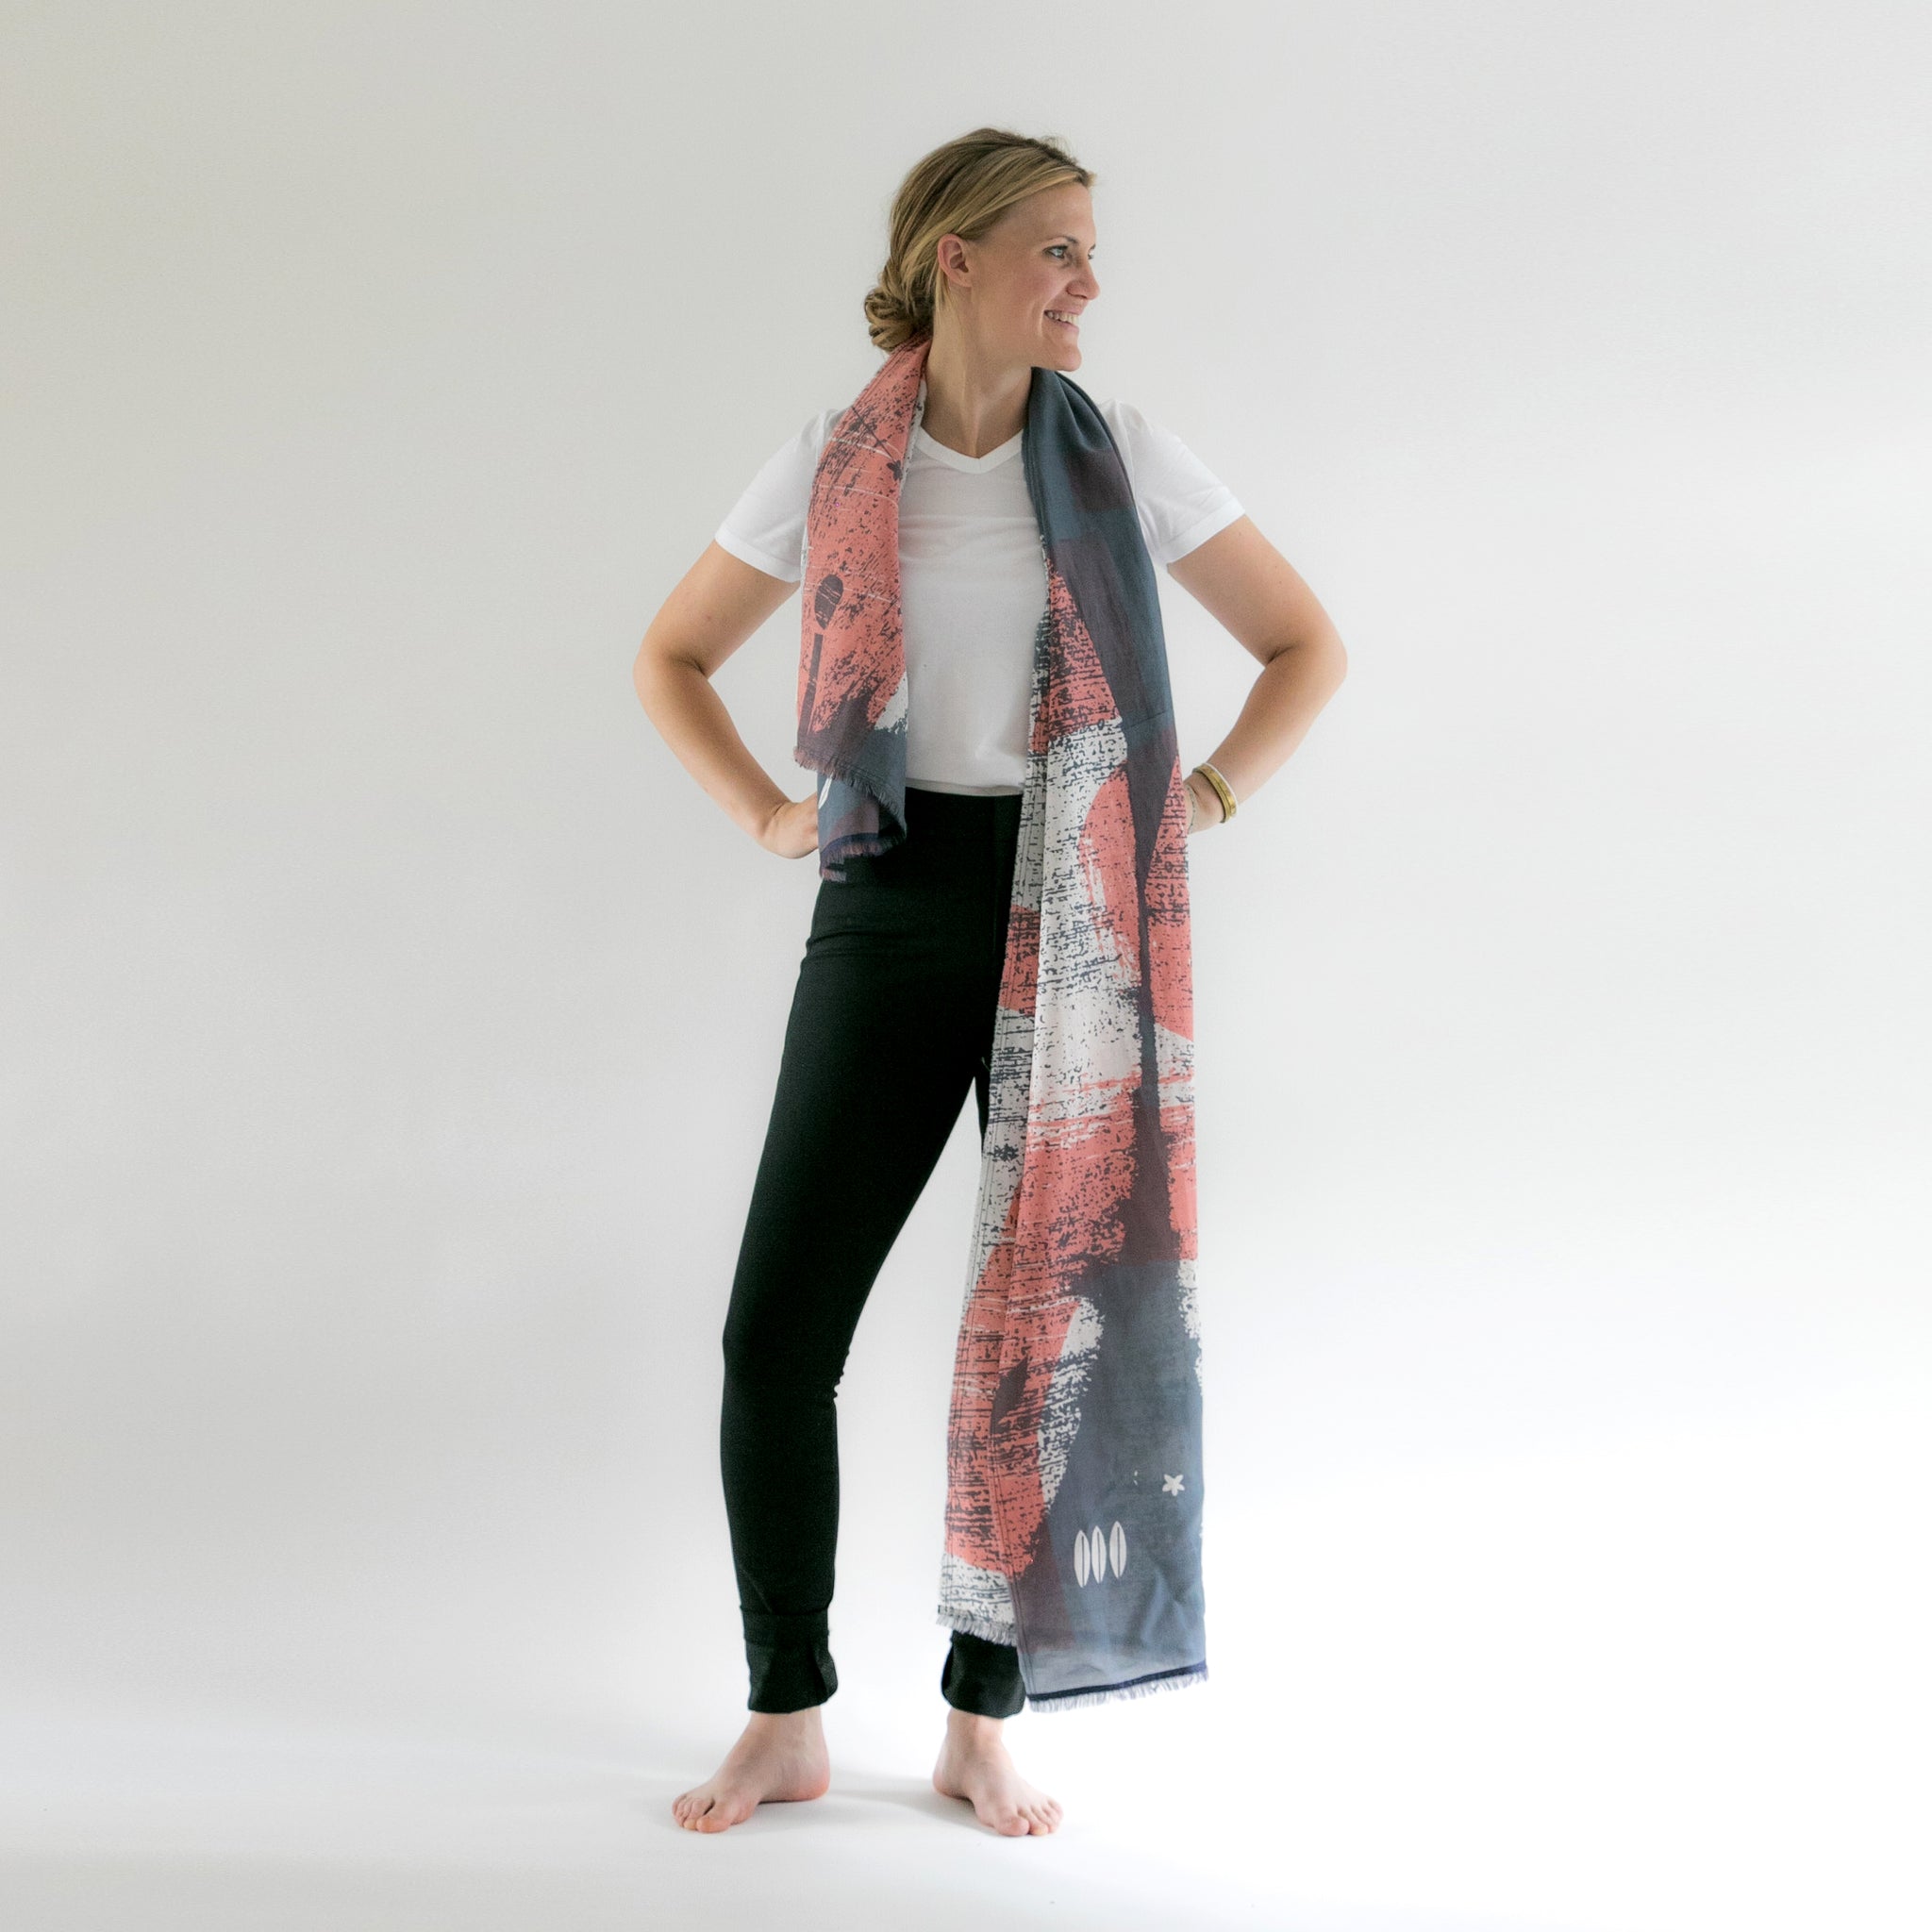 Discover the versatility of our Monogram Scarf Series, available